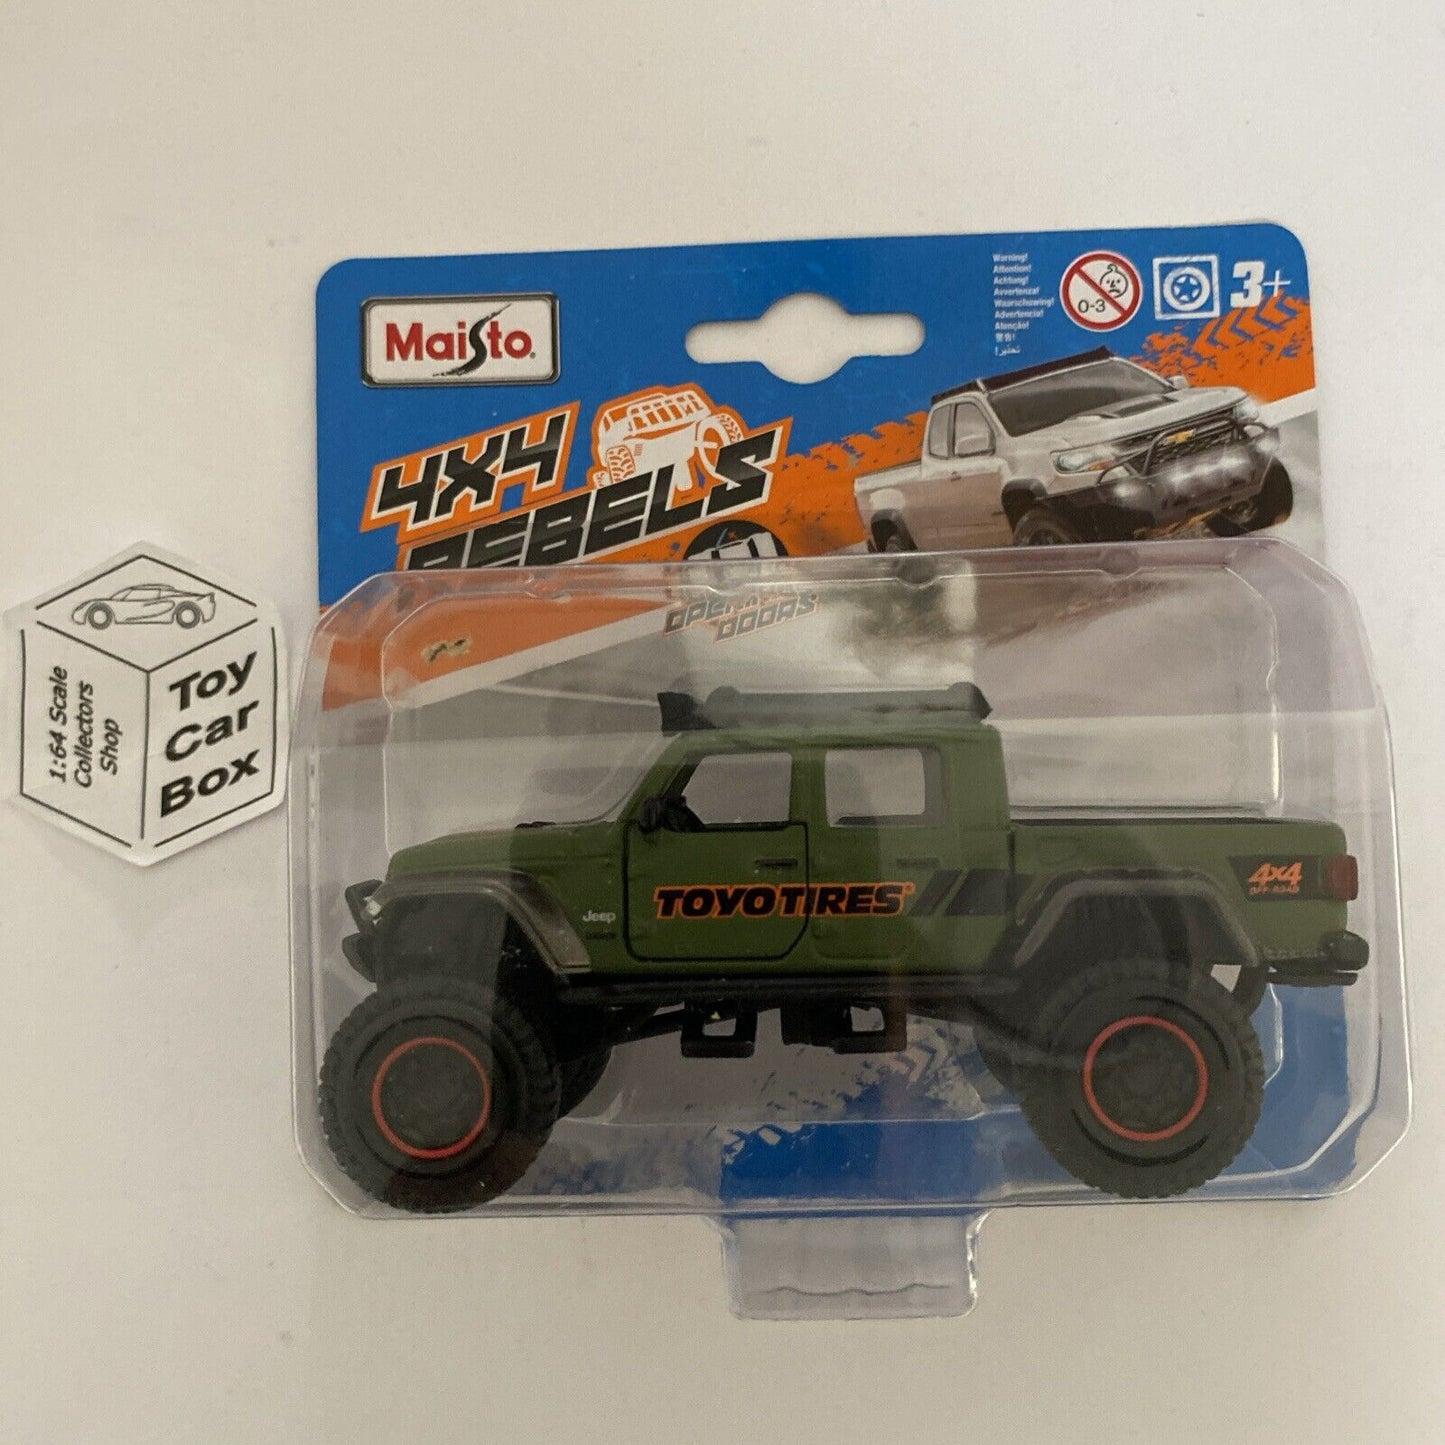 MAISTO - Jeep Gladiators (4x4 Rebels 4.5” - Approx 1:43 - Green Toyo Tyres) F05